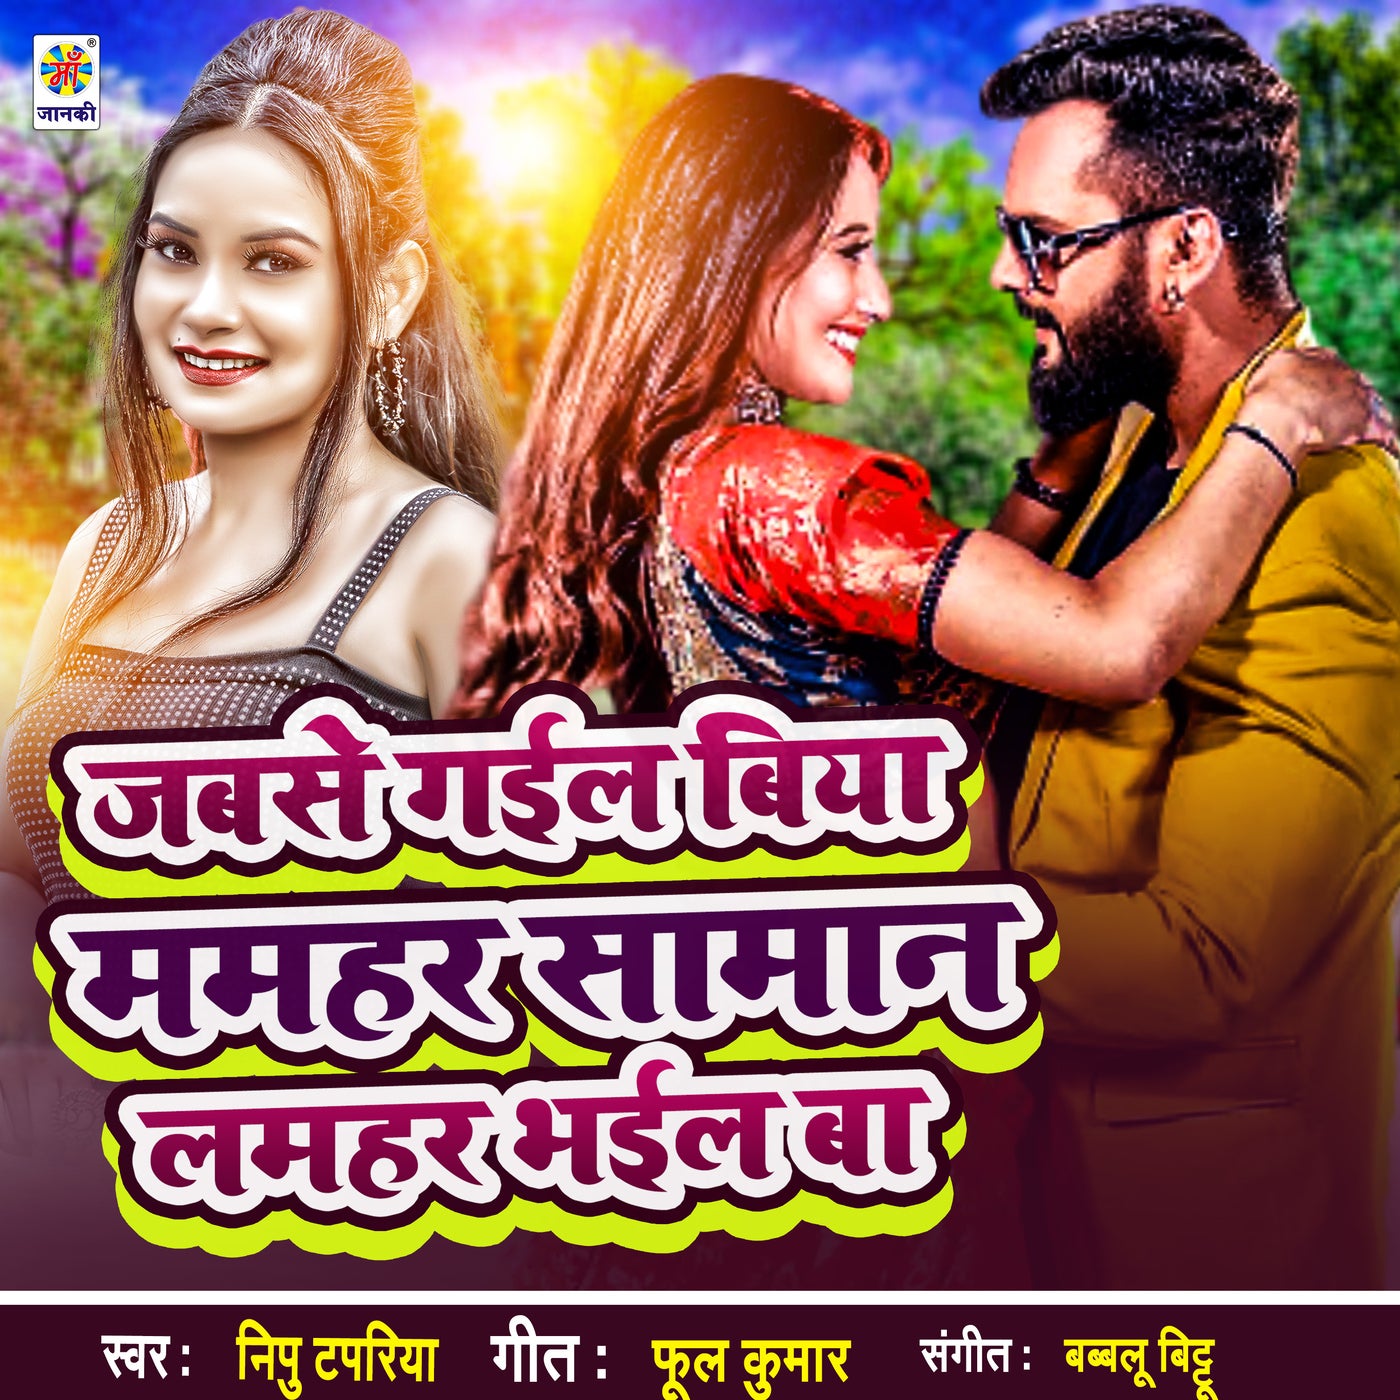 Pin by Jass manak on News songs | News songs, Songs, Me me me song